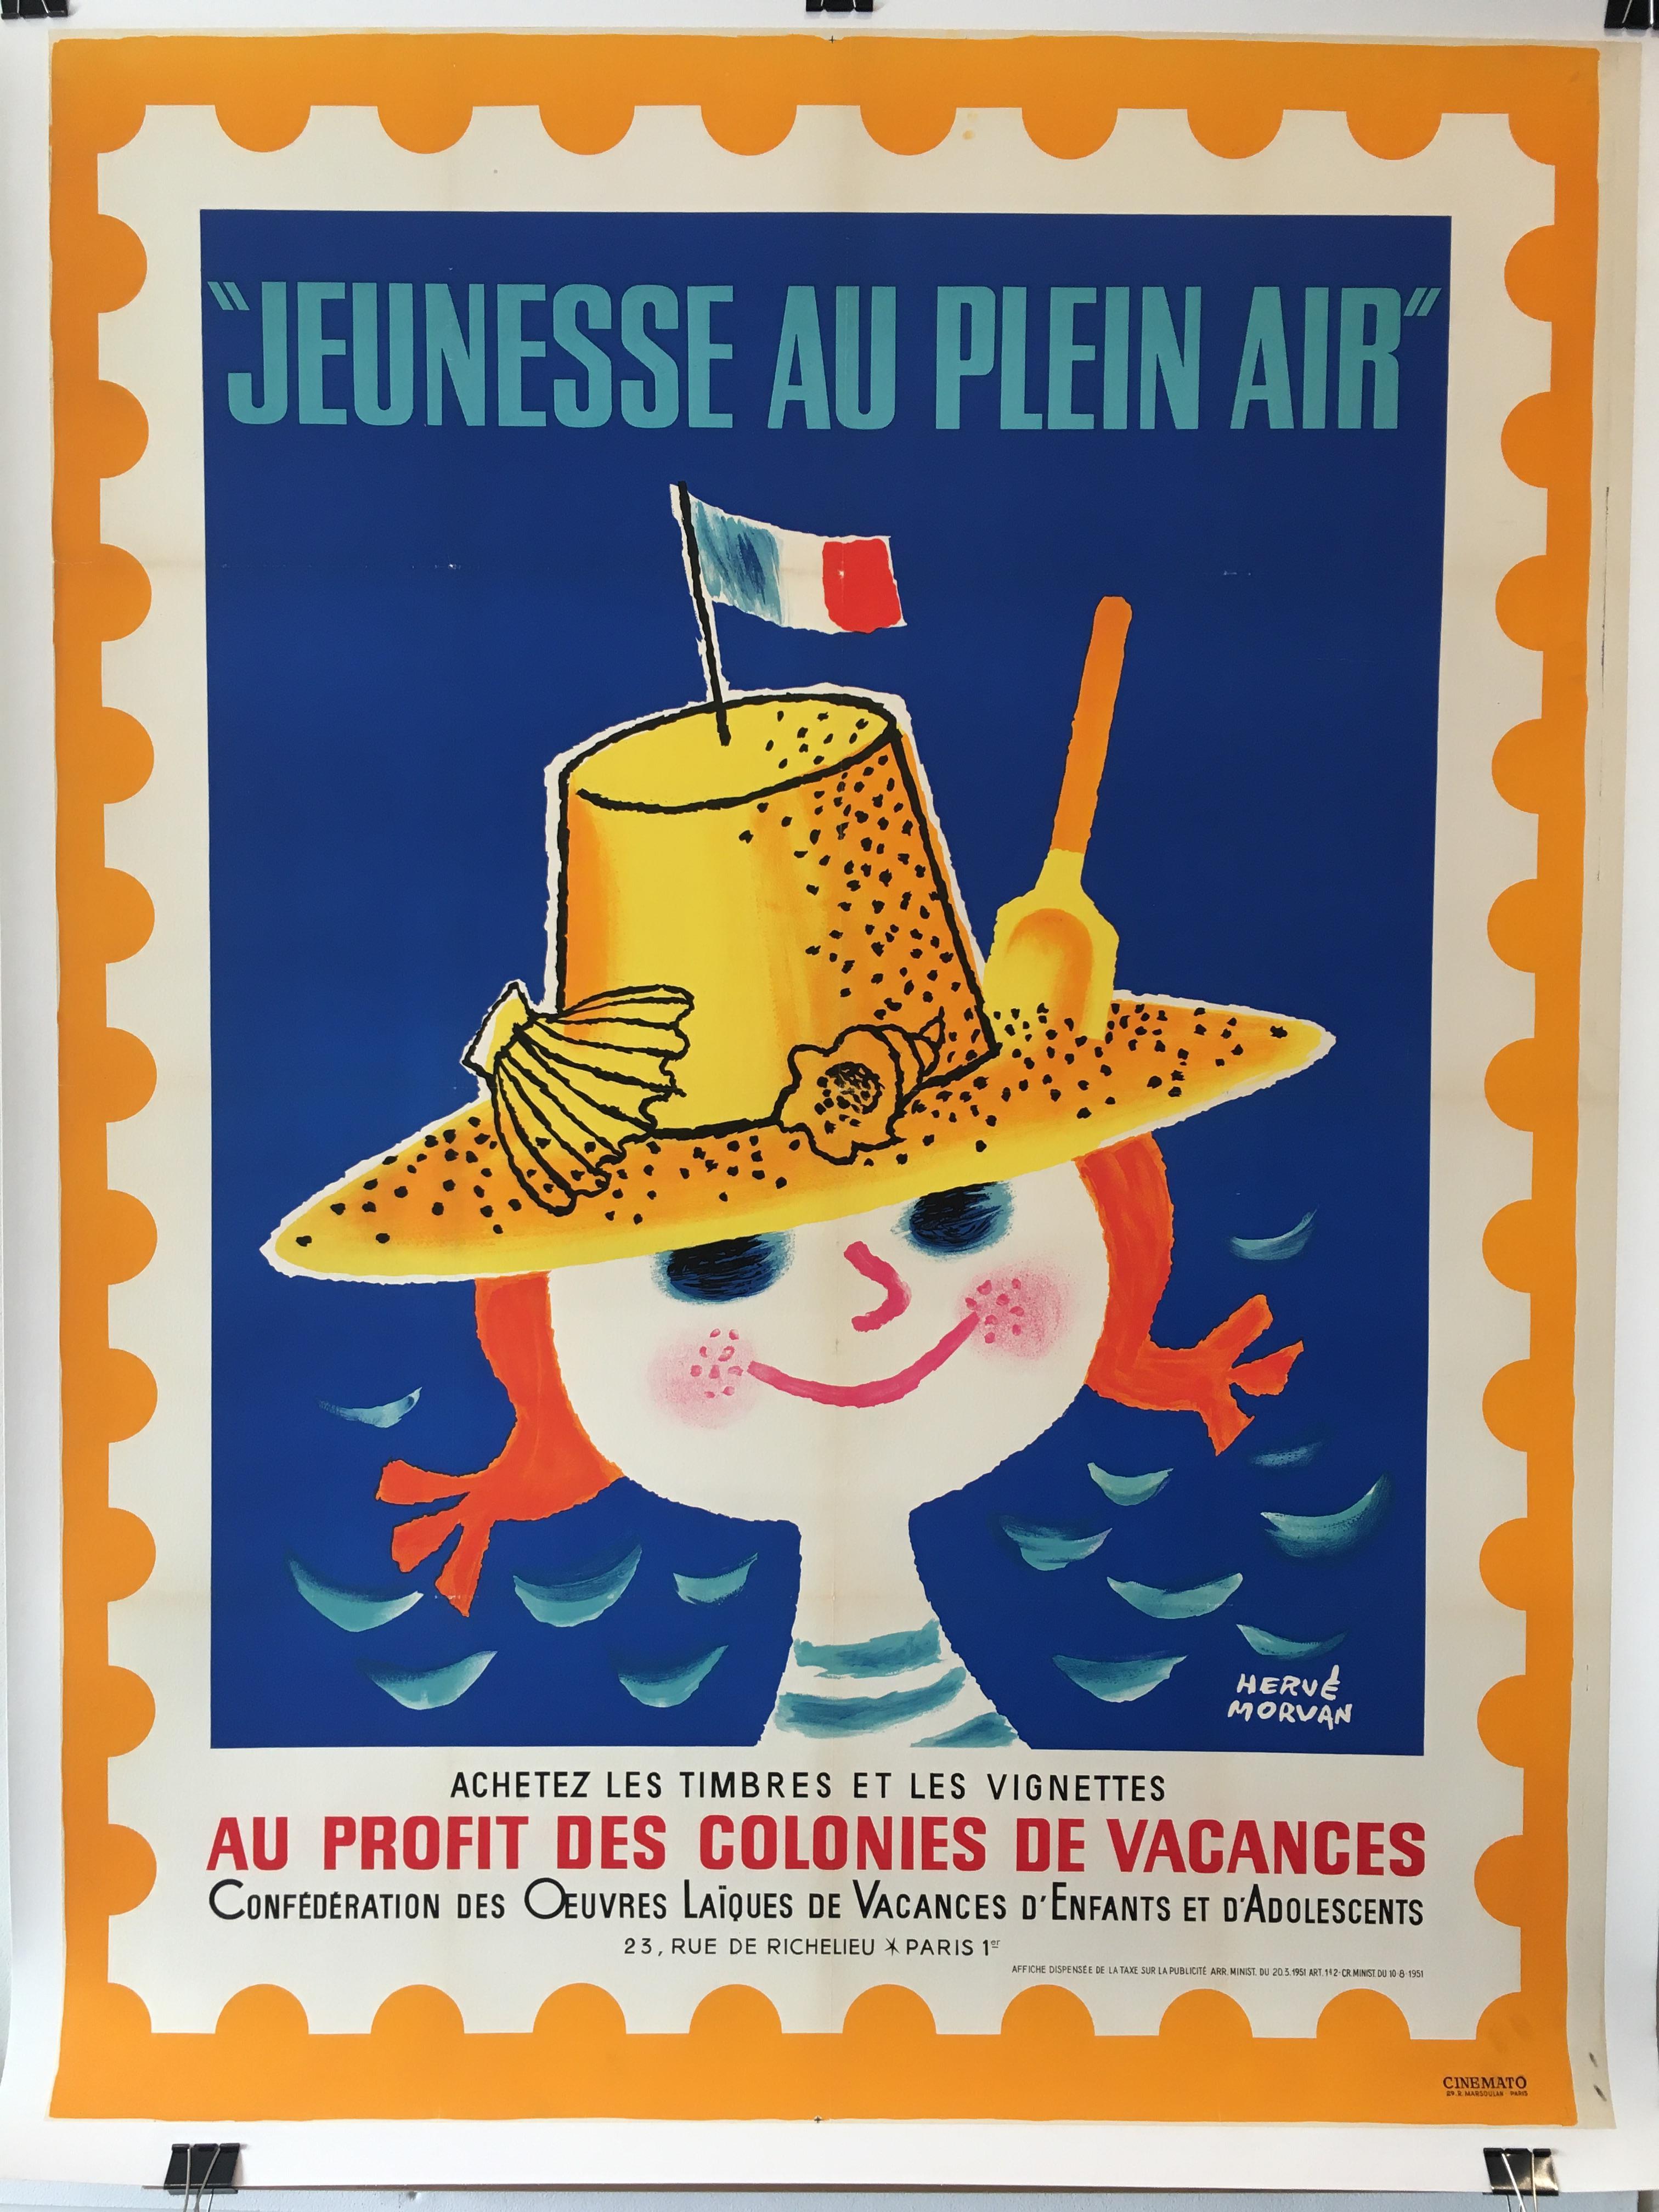 Mid-century original French vintage poster, 'Jeunesse Au Plein Air' by H. Morvan

A charming design for an outdoor camp for children by Herve Morvan a famous French artist working during the 1950’s and 1960’s

Artist
Herve